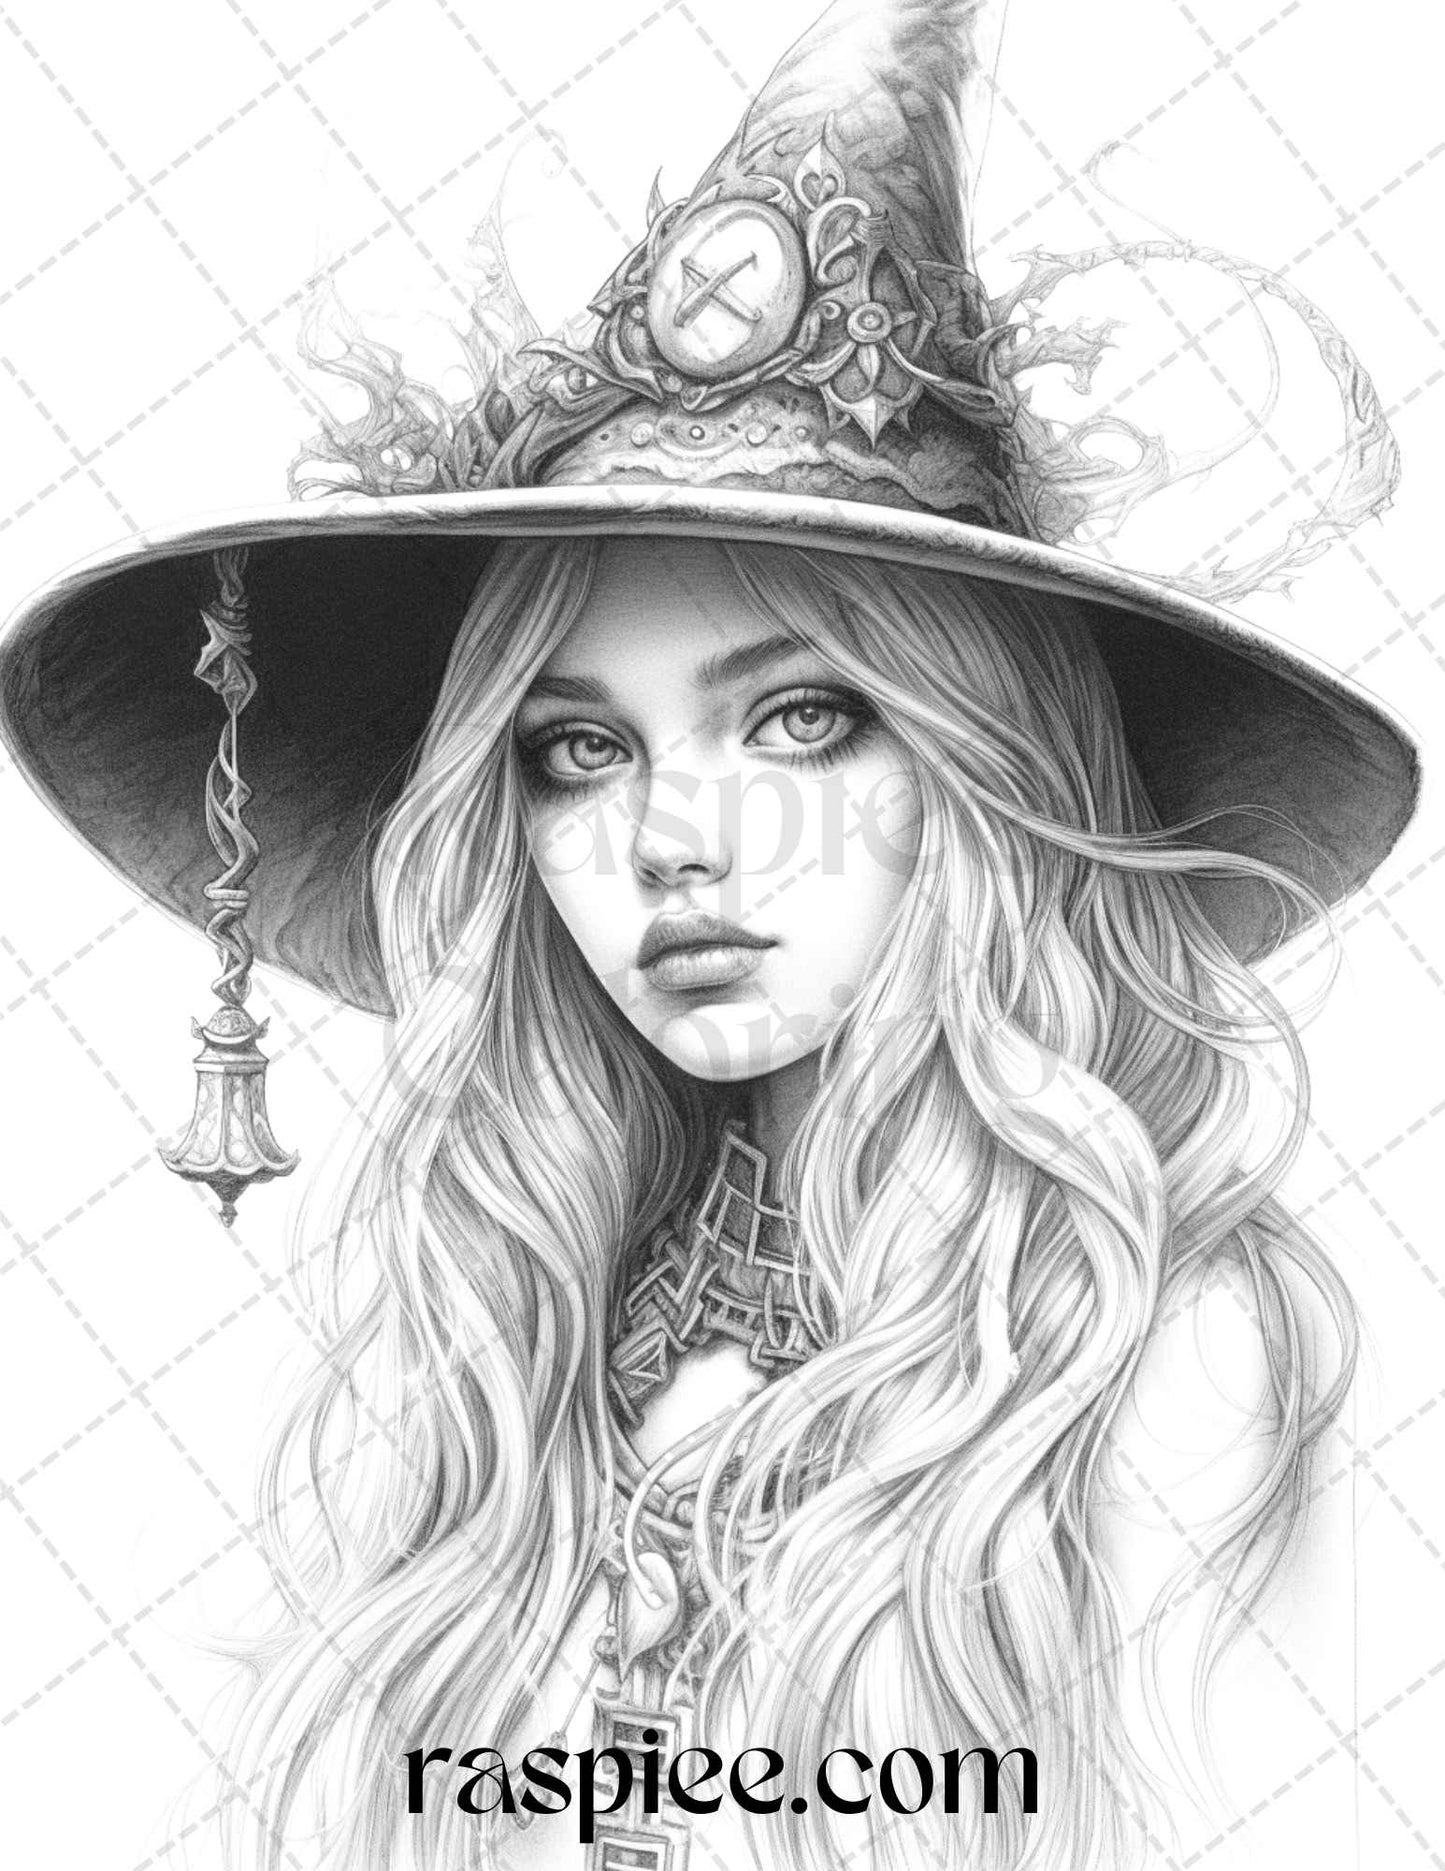 Grayscale coloring pages for adults, Printable witch coloring book, Witchcraft art illustrations, Magical coloring for adults, Halloween witch coloring pages, portrait coloring pages for adults